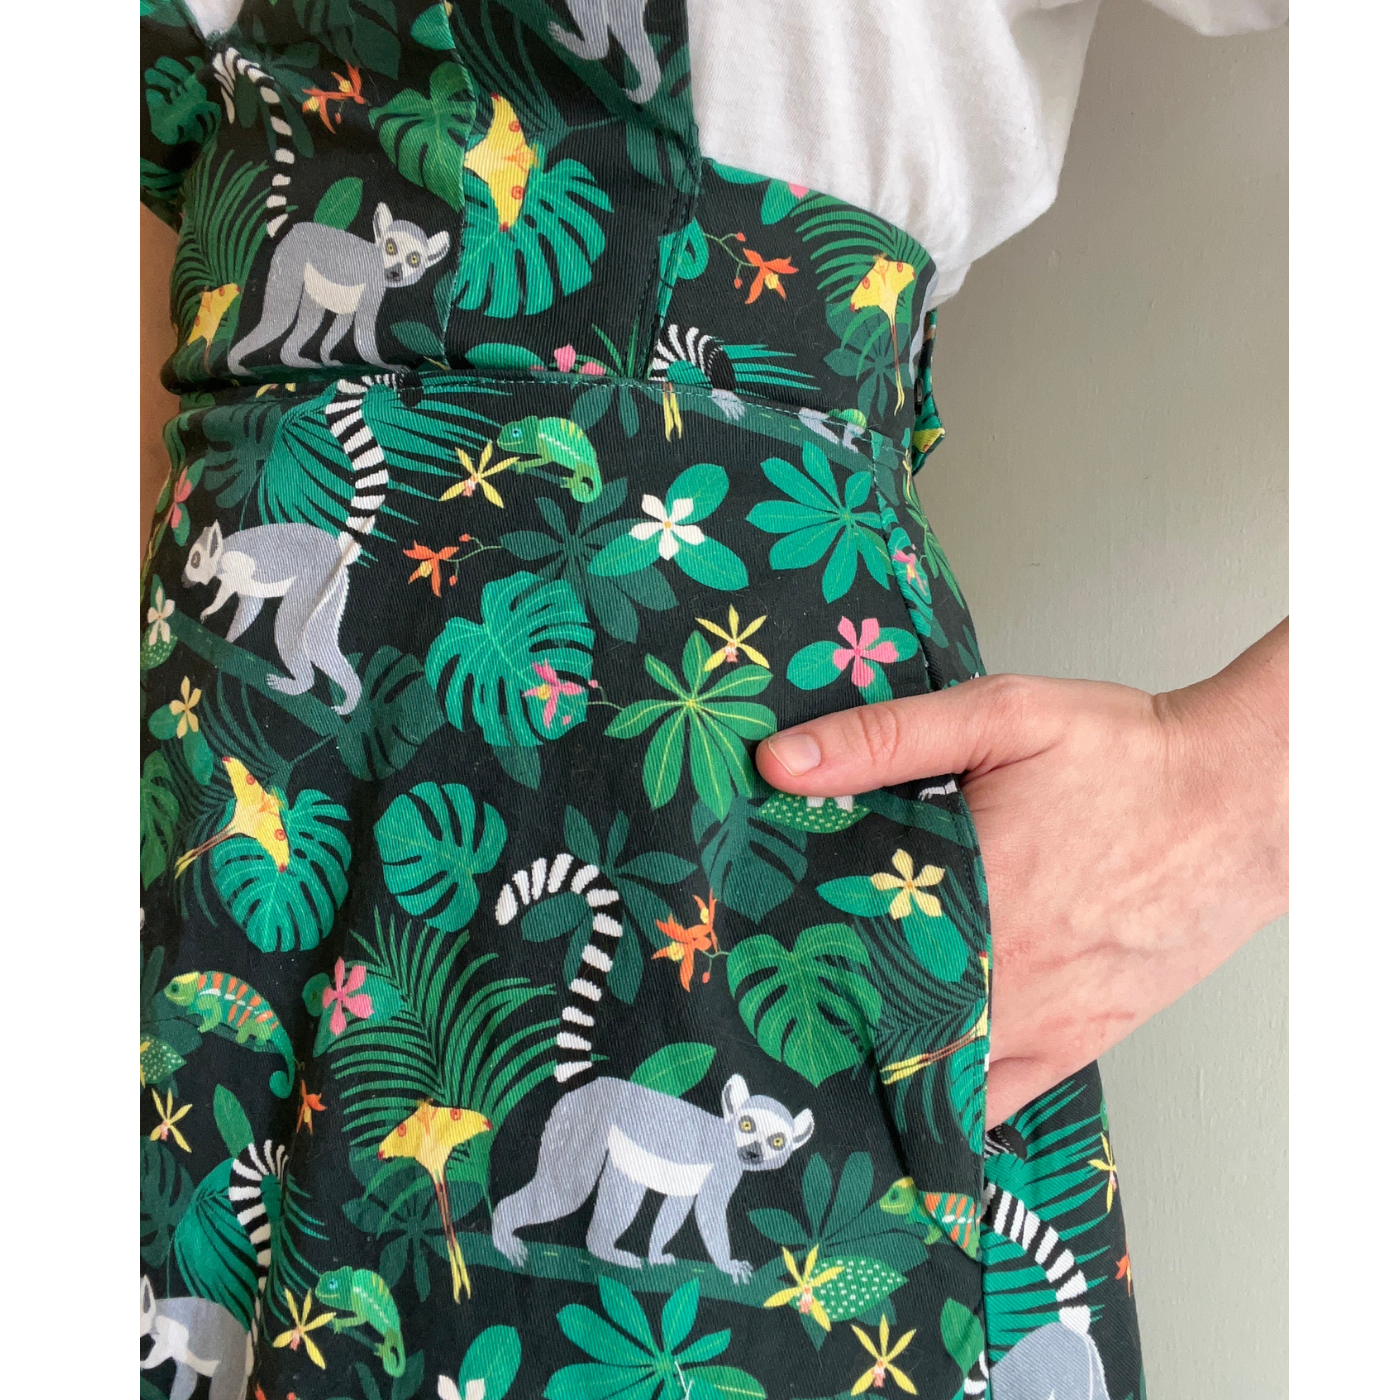 A close up of a pocket of the pinafore Anna is wearing with a black background and a repeating design with lemurs roaming around large green leaves with small white and yellow flowers. Her left hand is in her pocket.